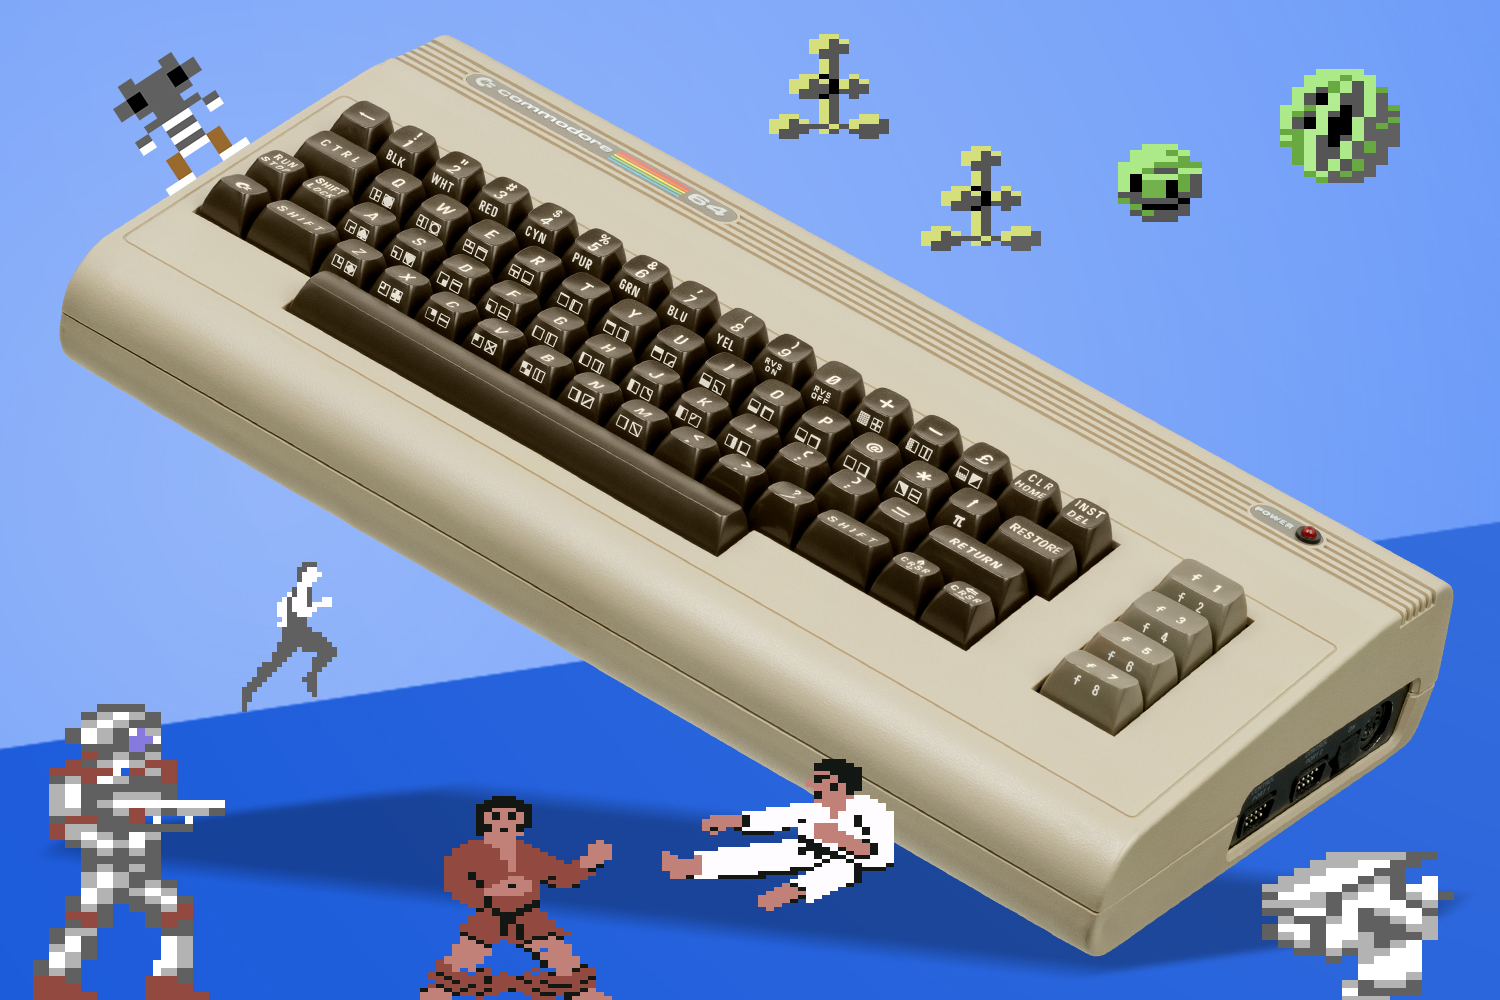 10 of the best Commodore 64 games plus a look back at the history of the C64